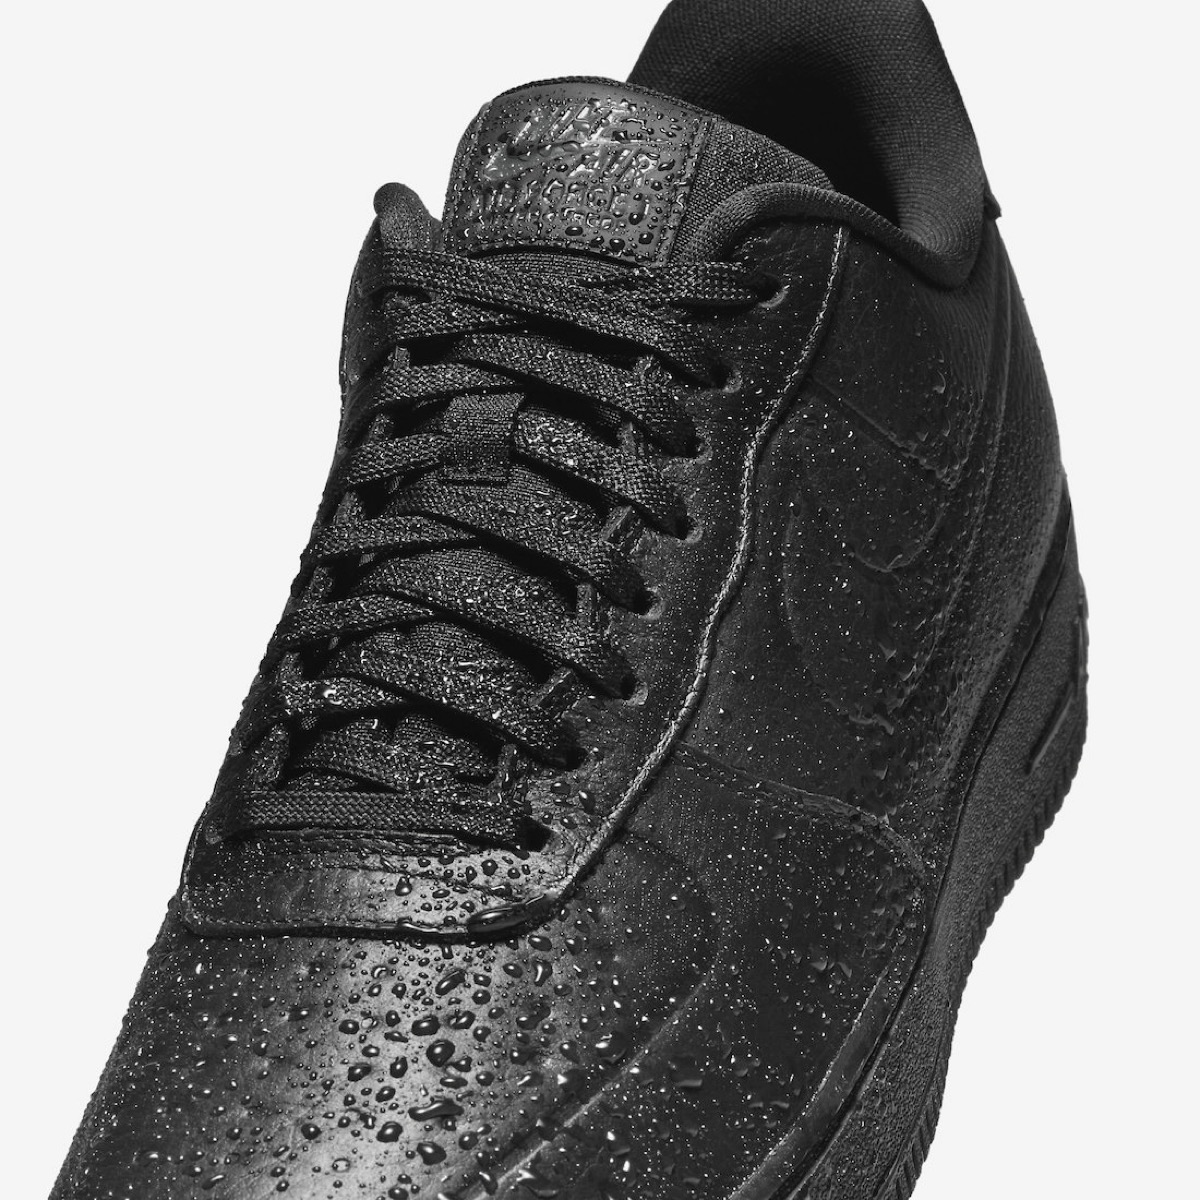 Nike Air Force 1 Low Pro-Tech “Black”が国内12月1日より発売［FB8875